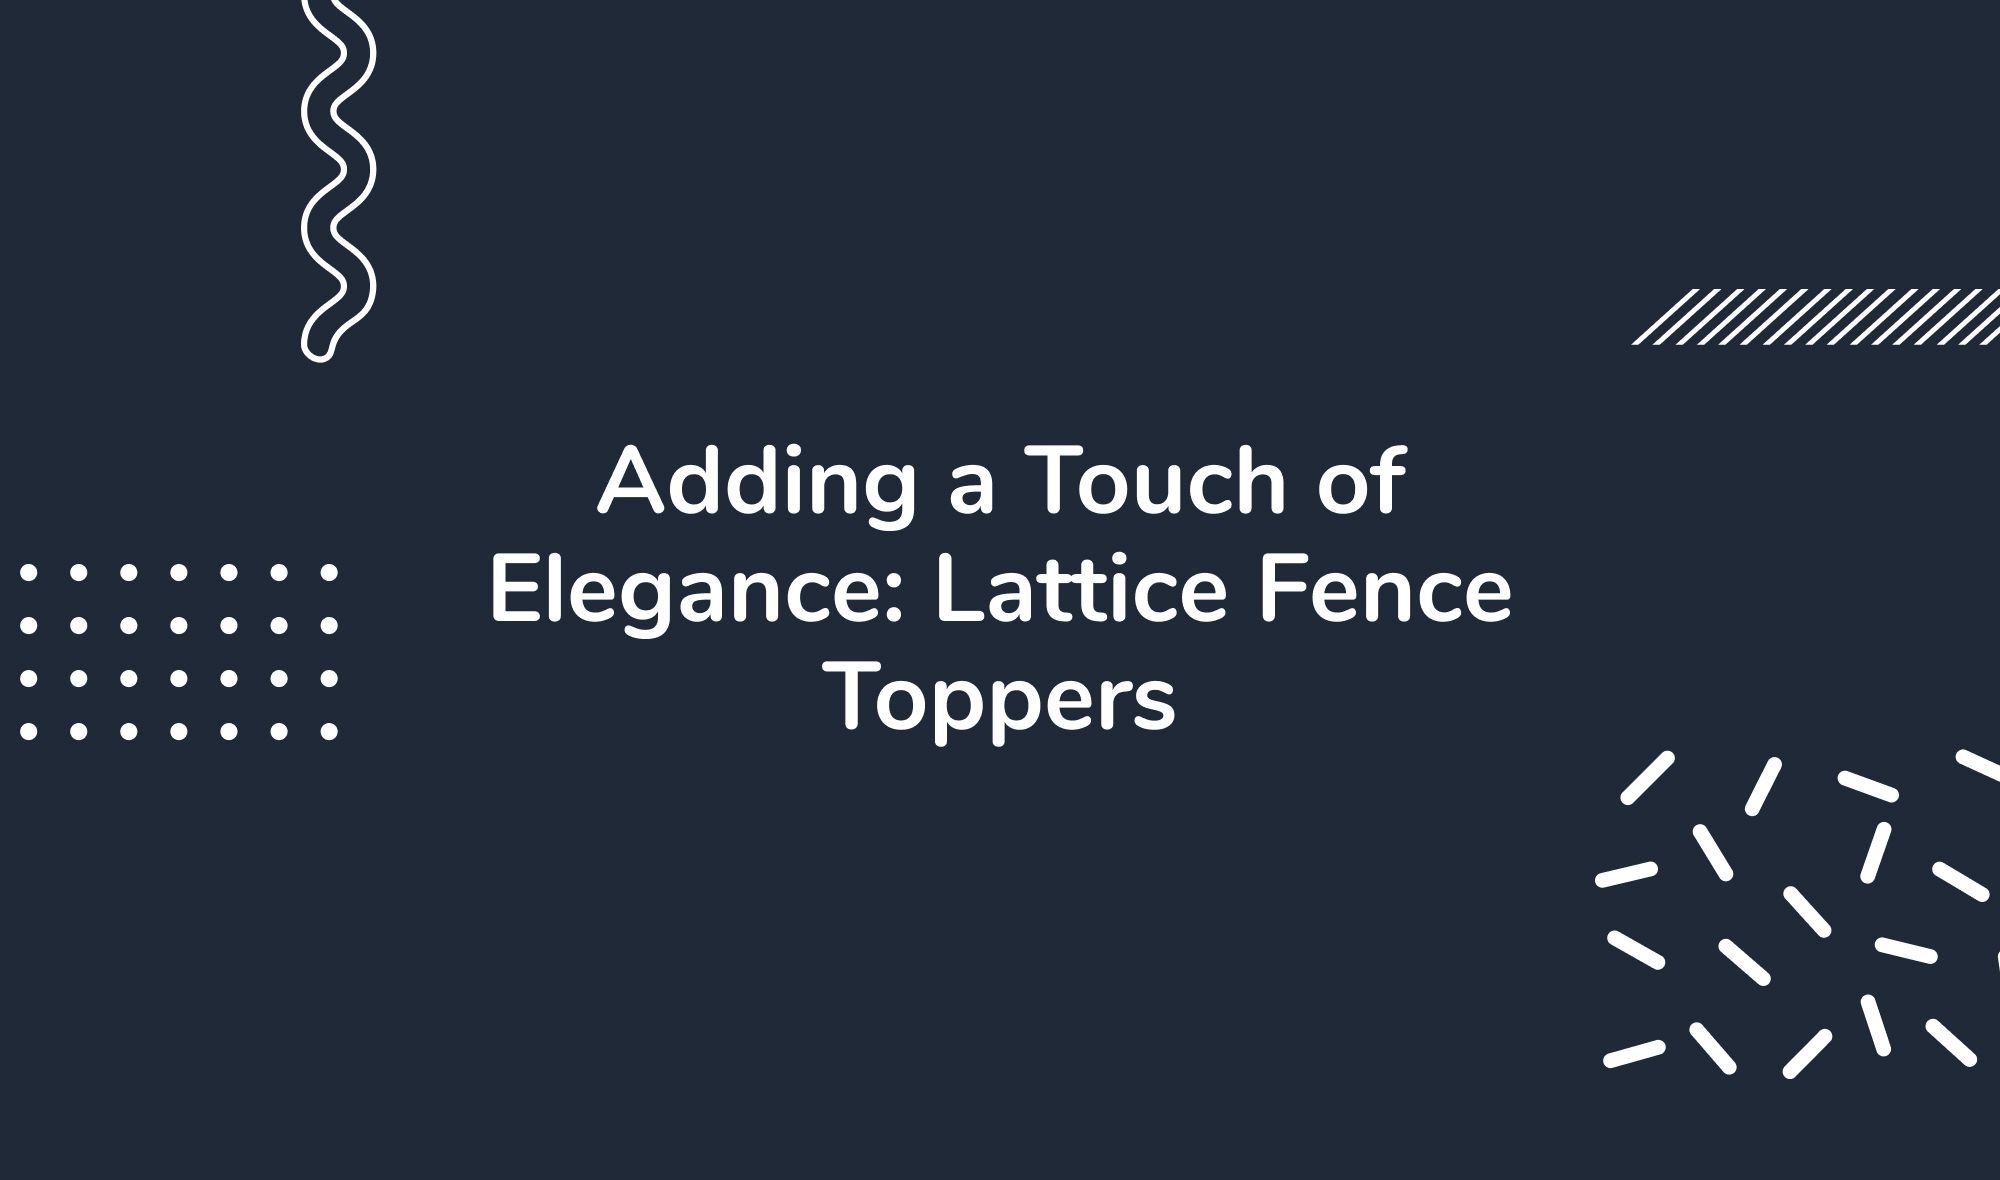 Adding a Touch of Elegance: Lattice Fence Toppers